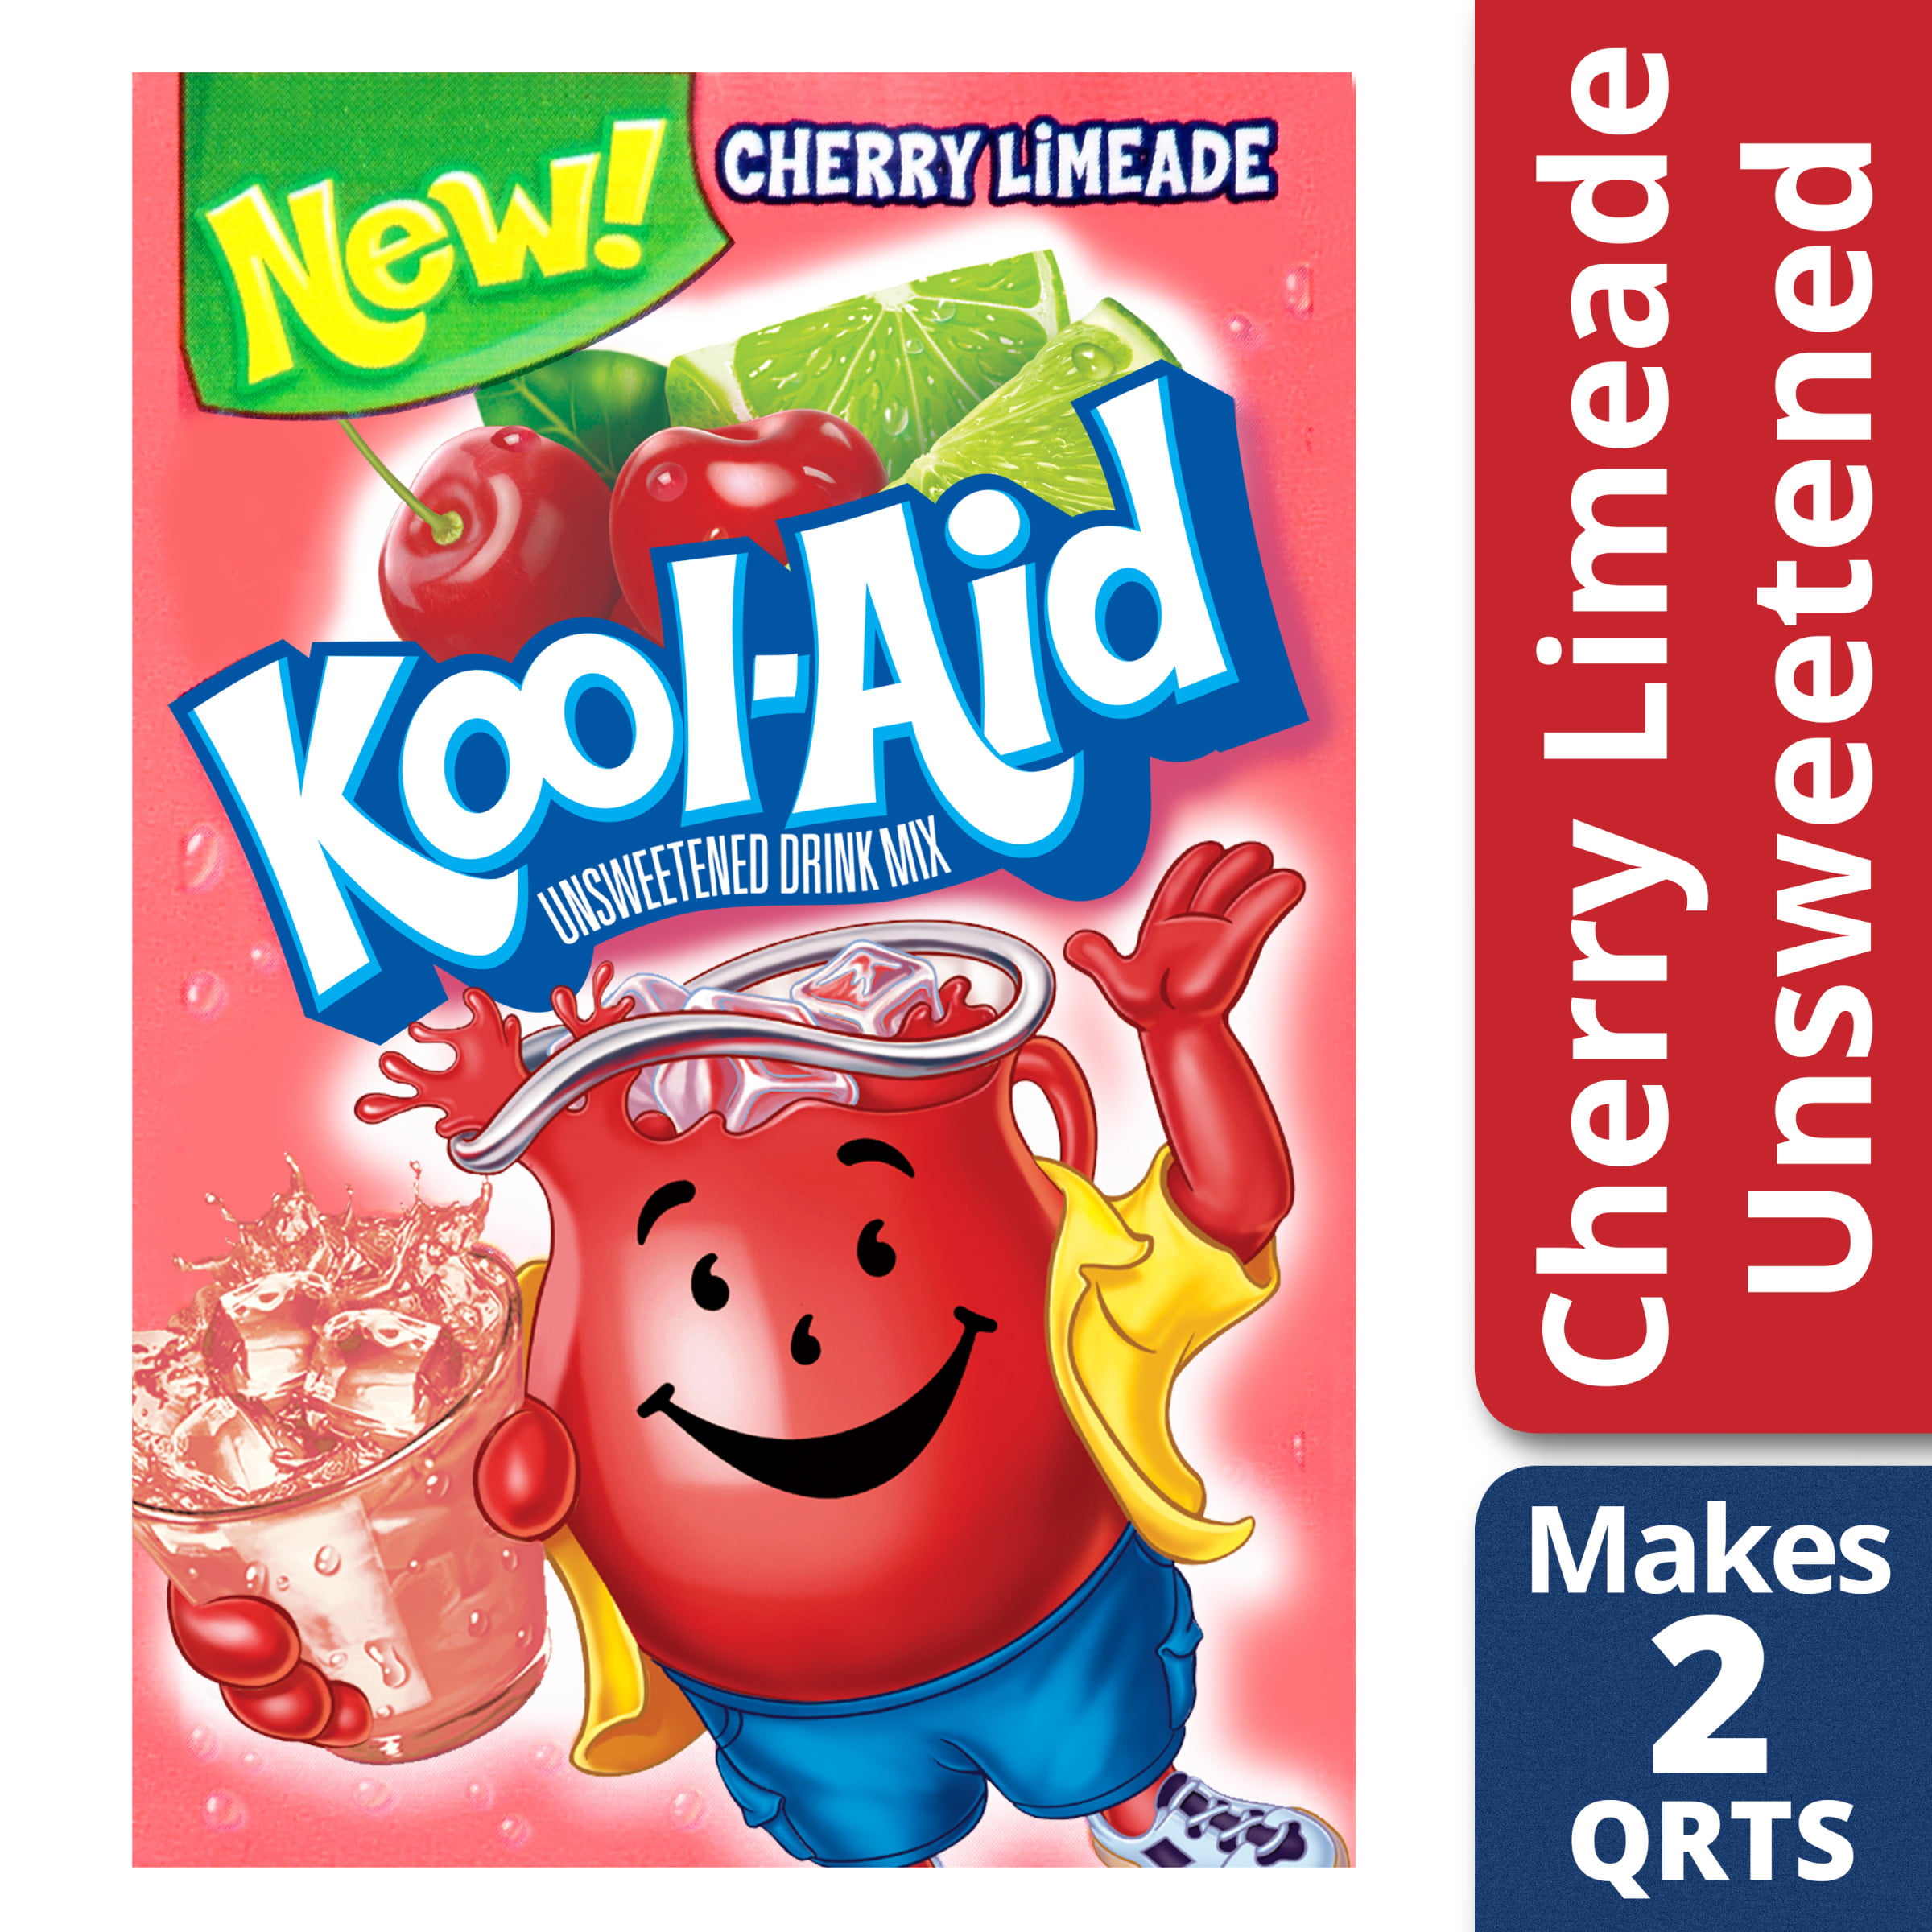 Kool-Aid Unsweetened Cherry Limeade Powdered Drink Mix, .16 oz Packet